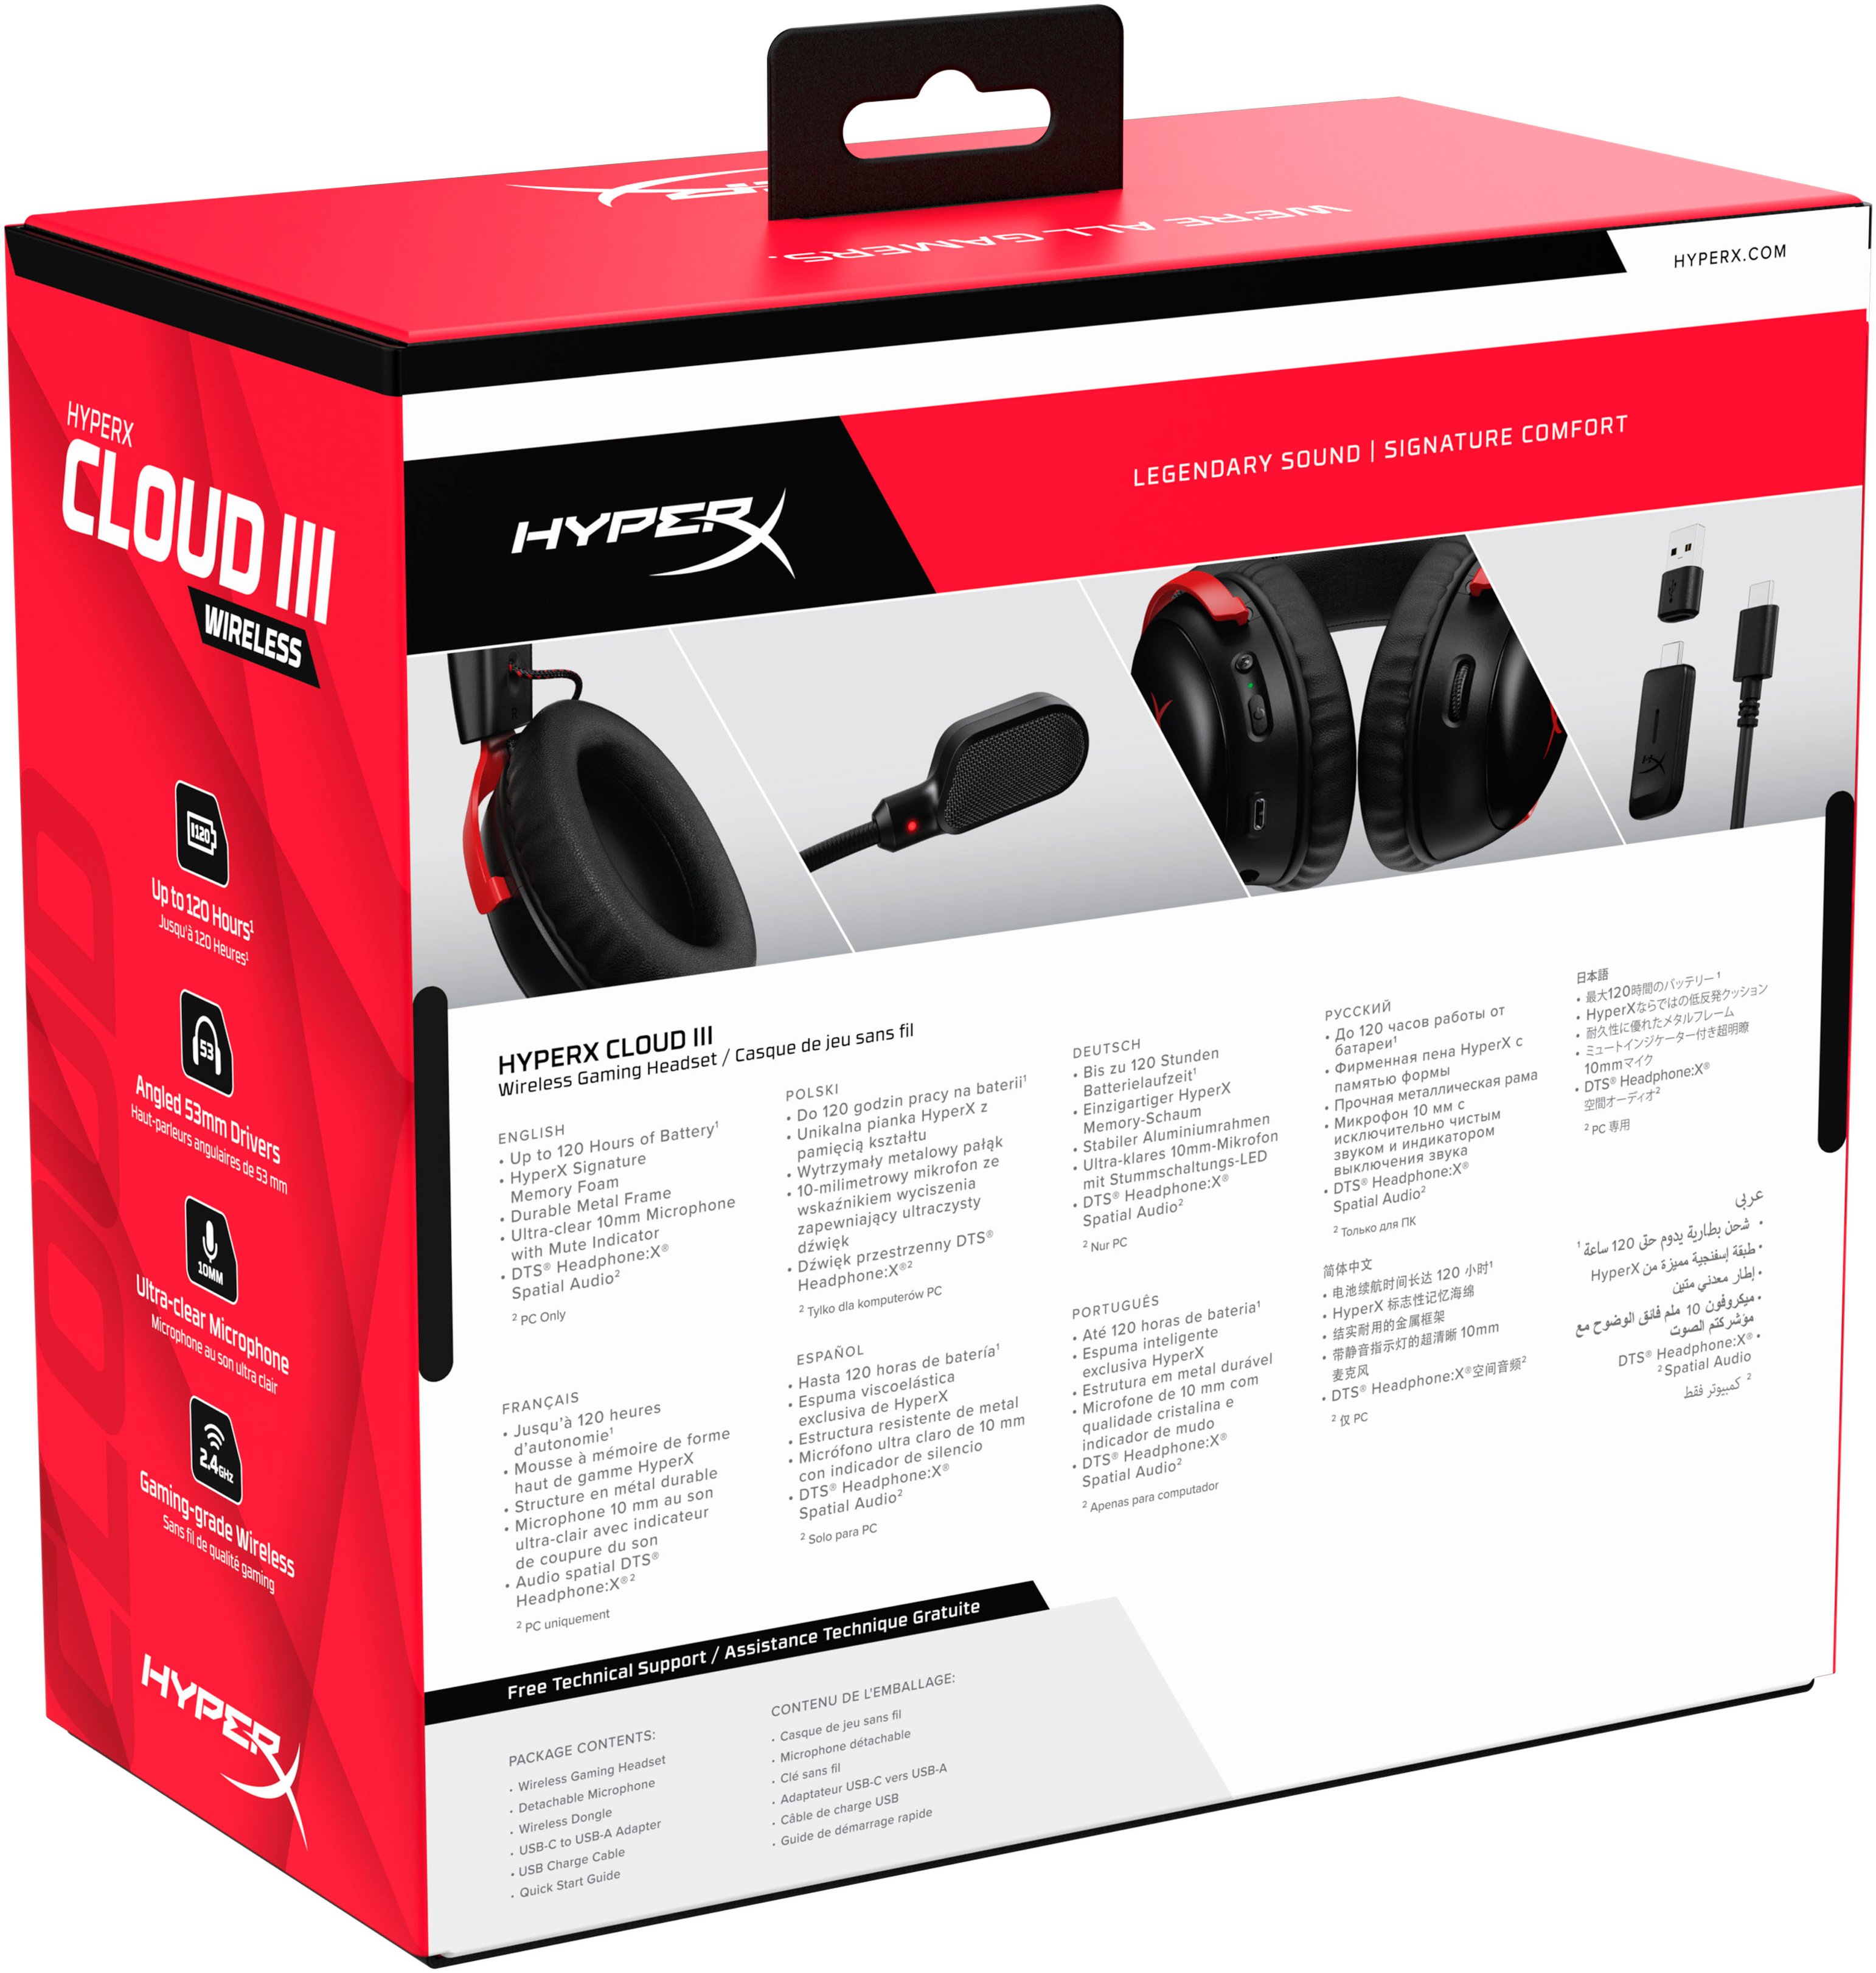 HyperX Cloud III Wireless Gaming Headset for PC, PS5, PS4, and Nintendo ...